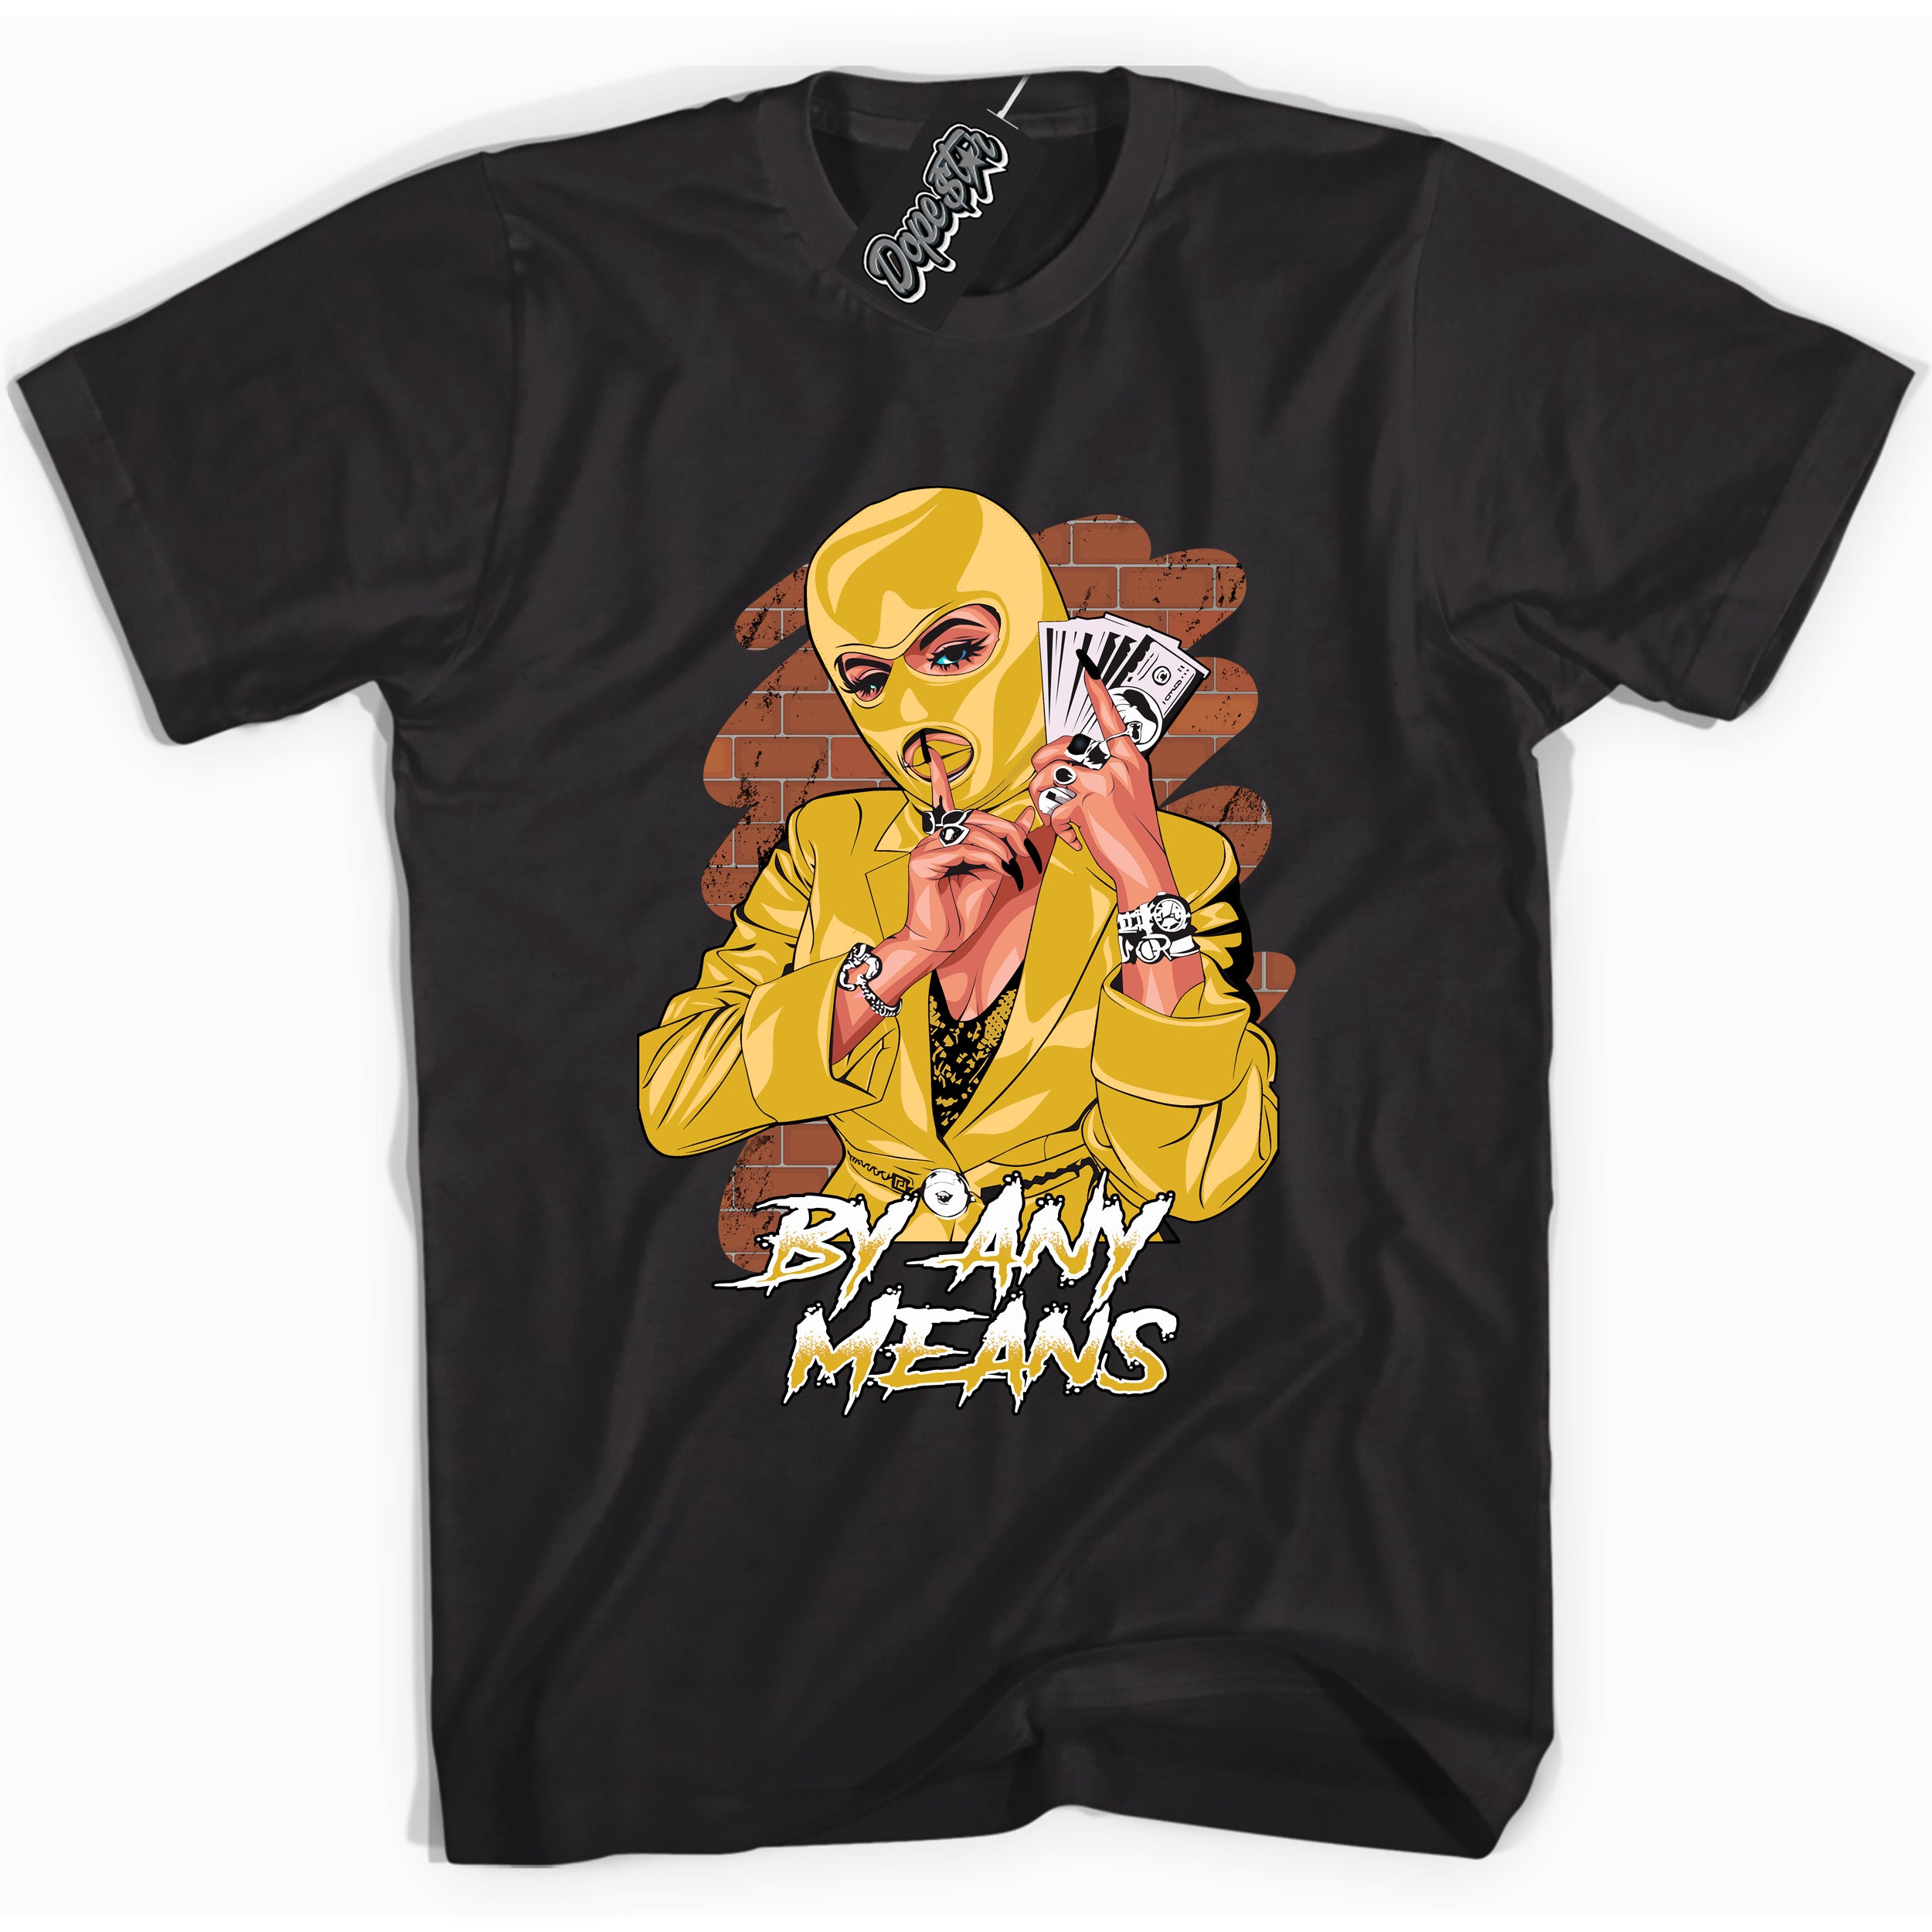 Cool black Shirt with “ By Any Means” design that perfectly matches Yellow Ochre 6s Sneakers.